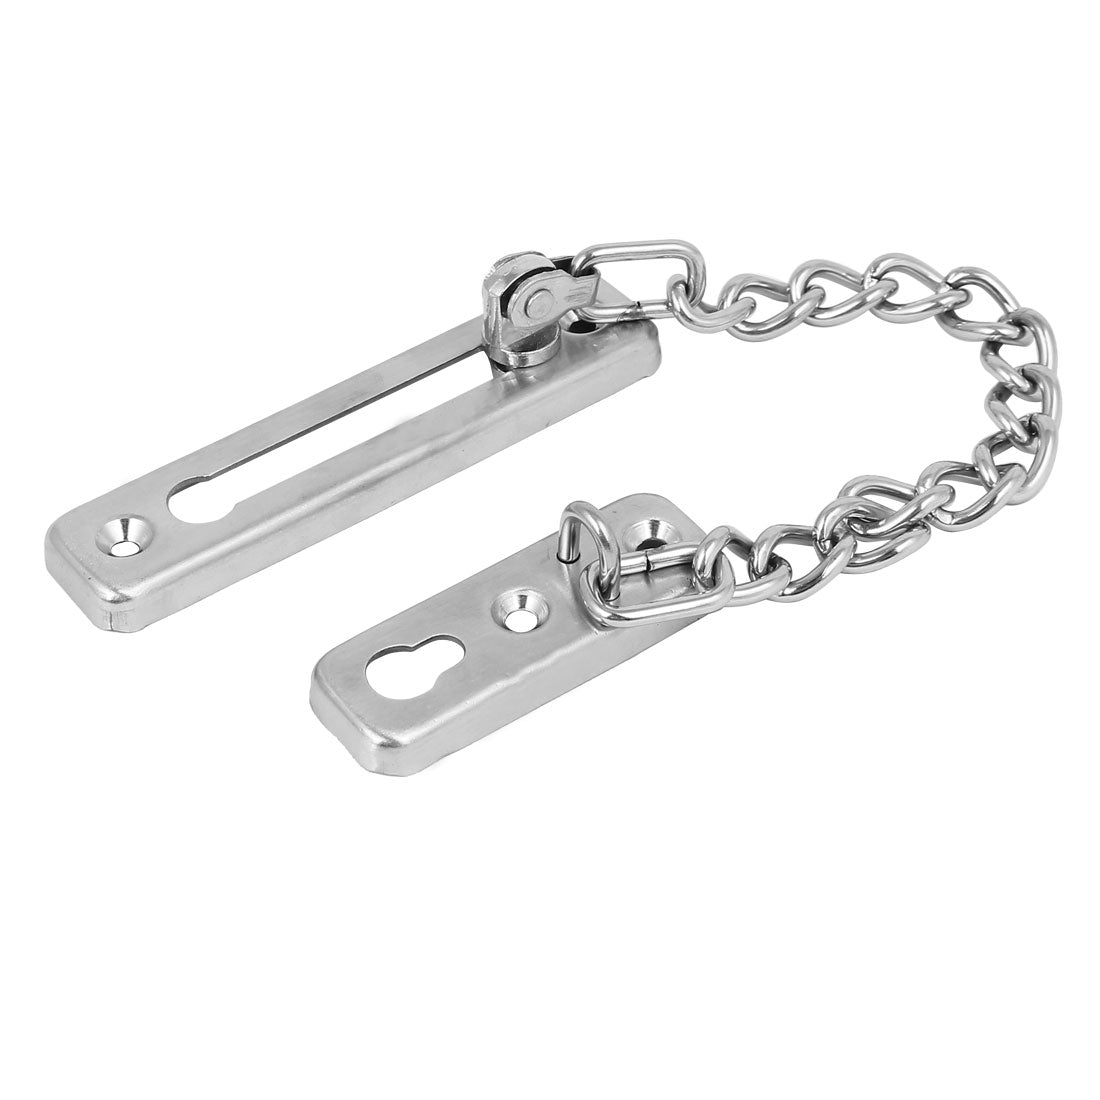 uxcell Uxcell Bedroom Store Security Slide Bolt Door Chain Lock Silver Tone 32cm Length